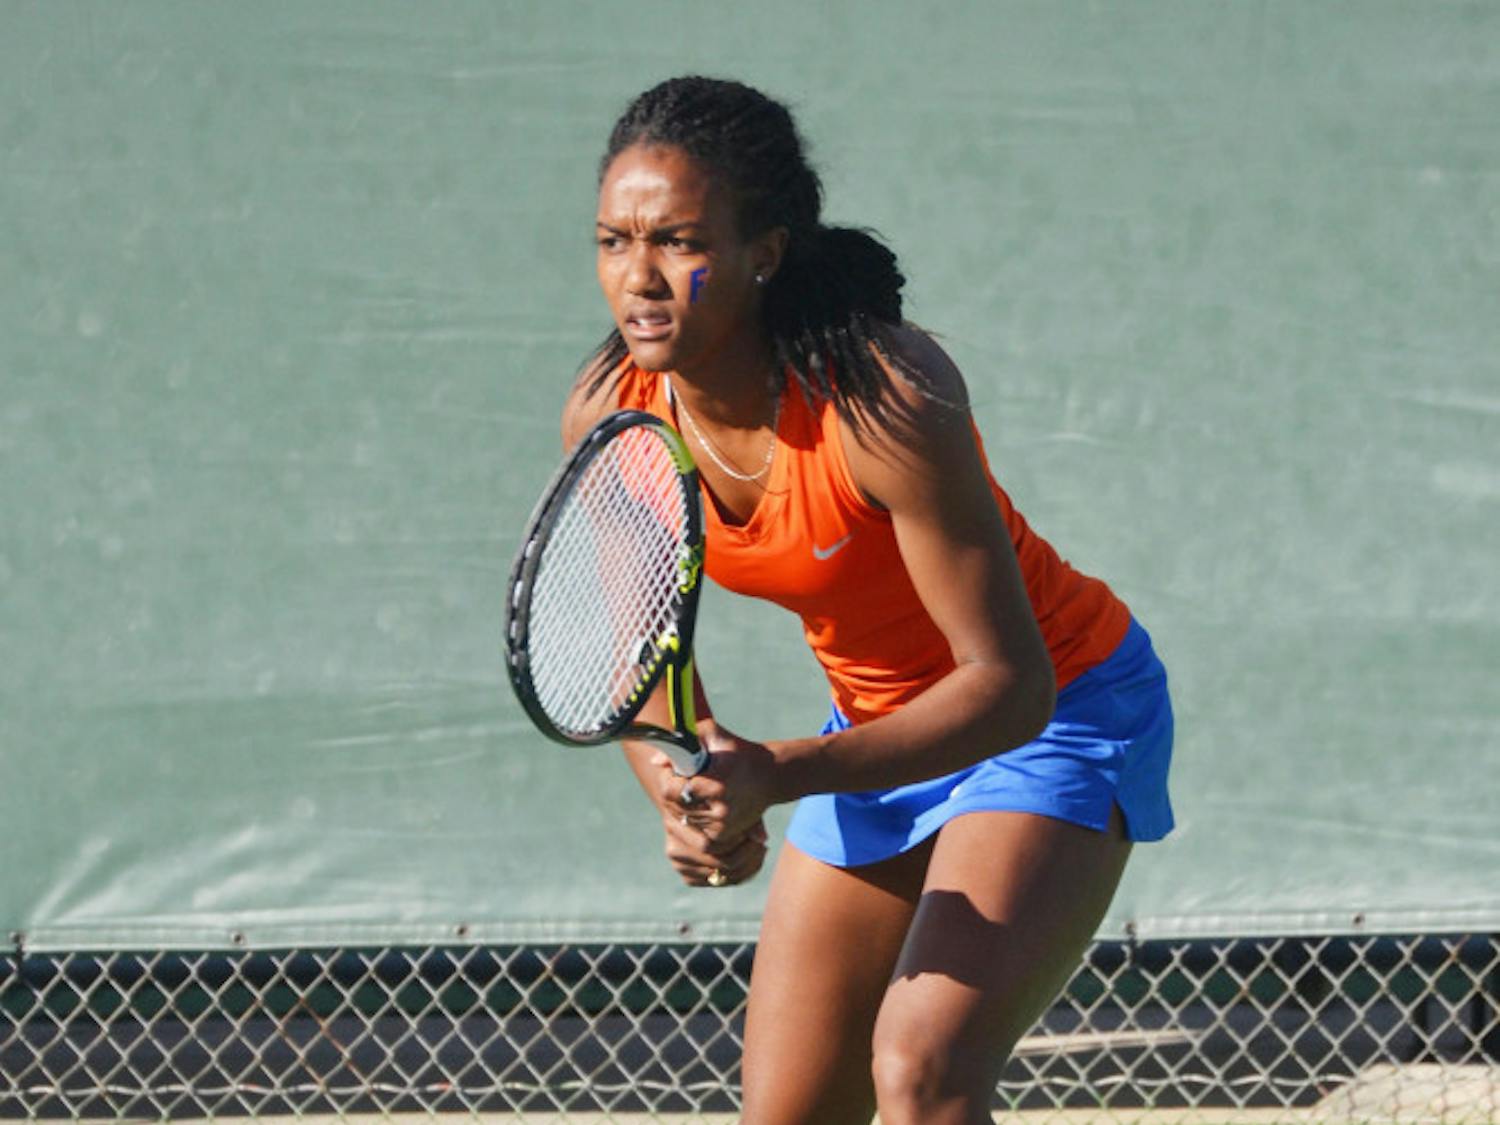 Brianna Morgan awaits a serve during Florida's 4-0 win against Maryland on Jan. 25 at the Ring Tennis Complex.